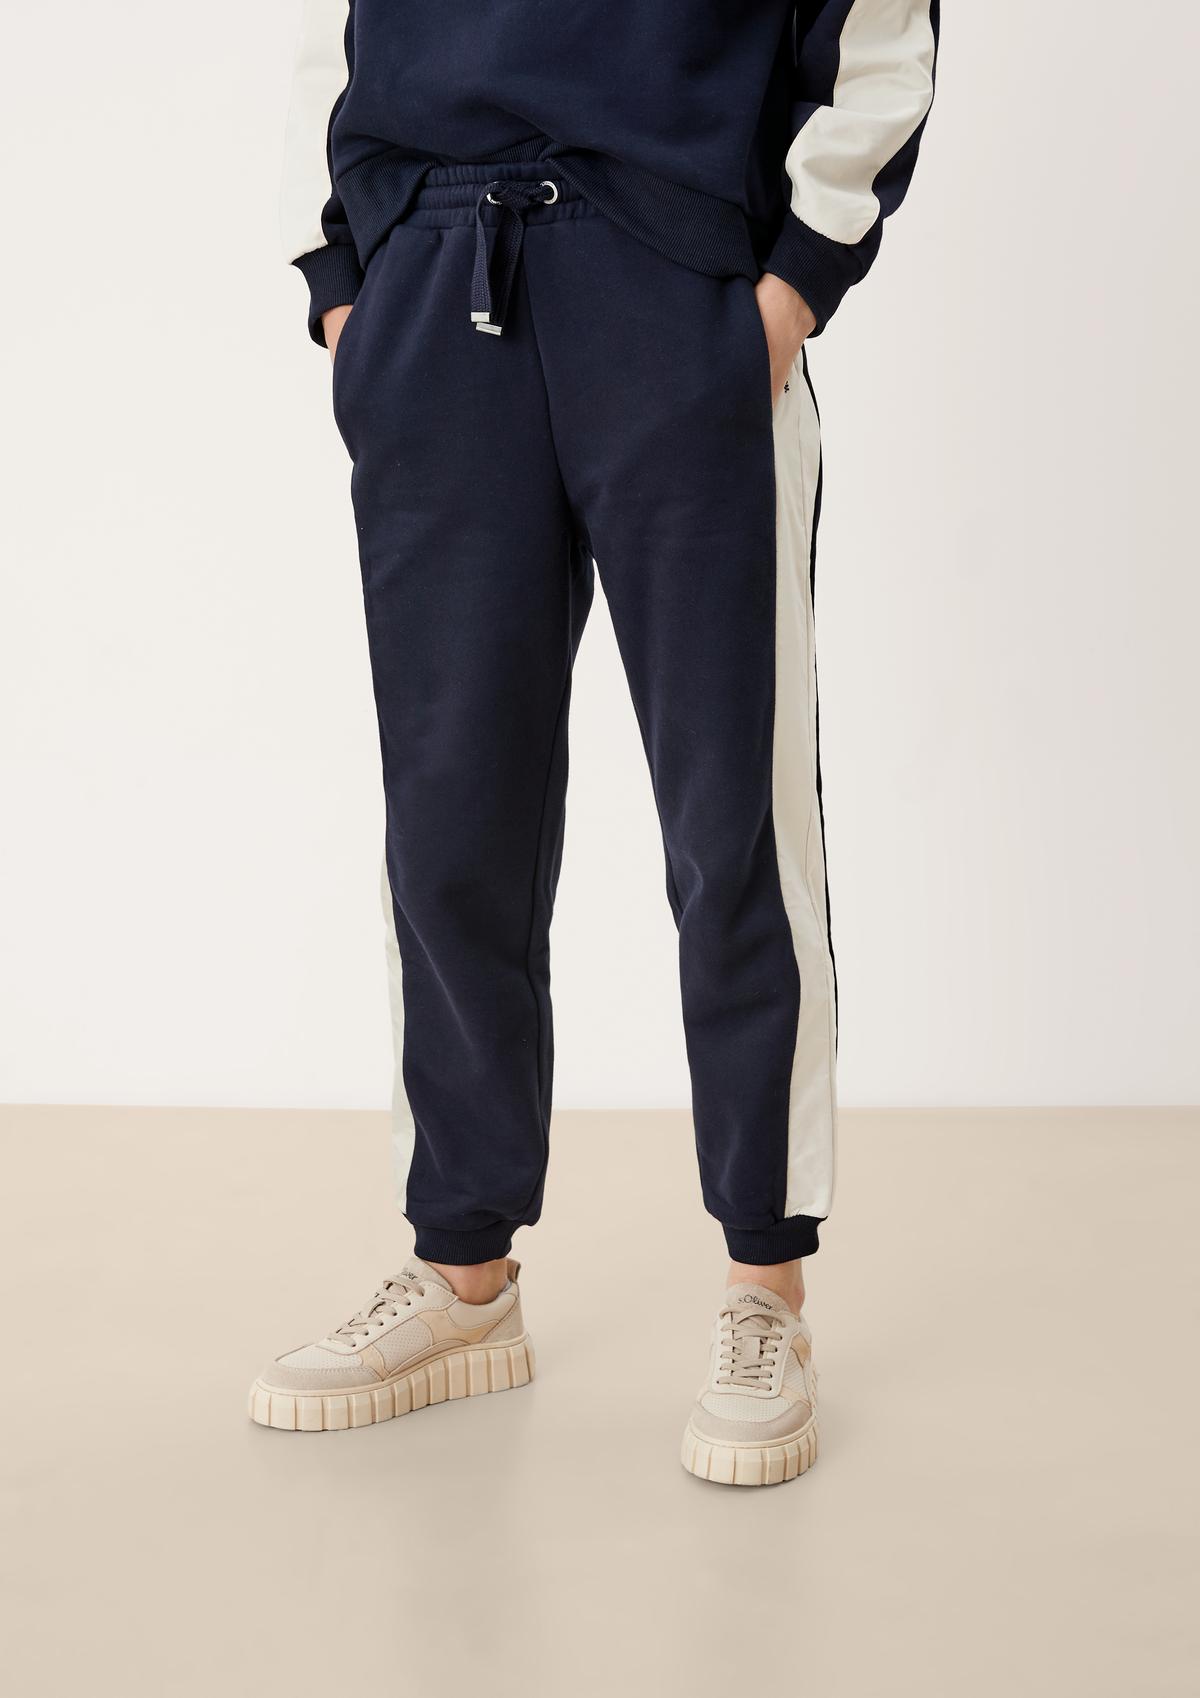 Tracksuit bottoms with contrasting stripes